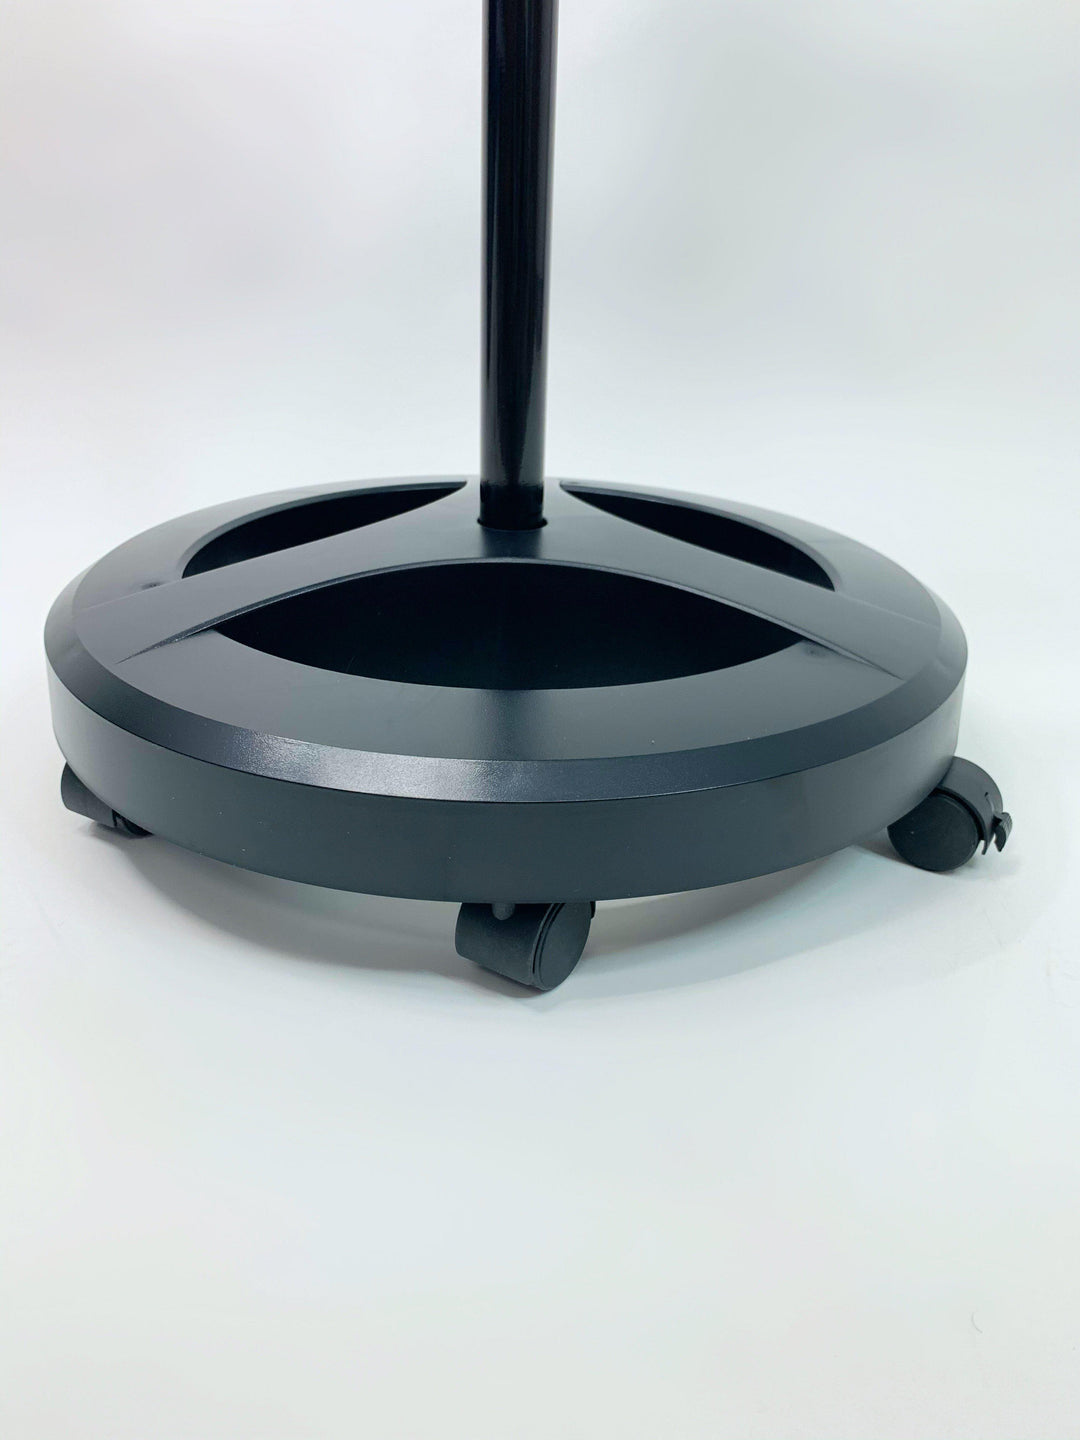 a Lash Light with Storage Tray | Lash Salon Light from Lash Tribe, with a black base on wheels.